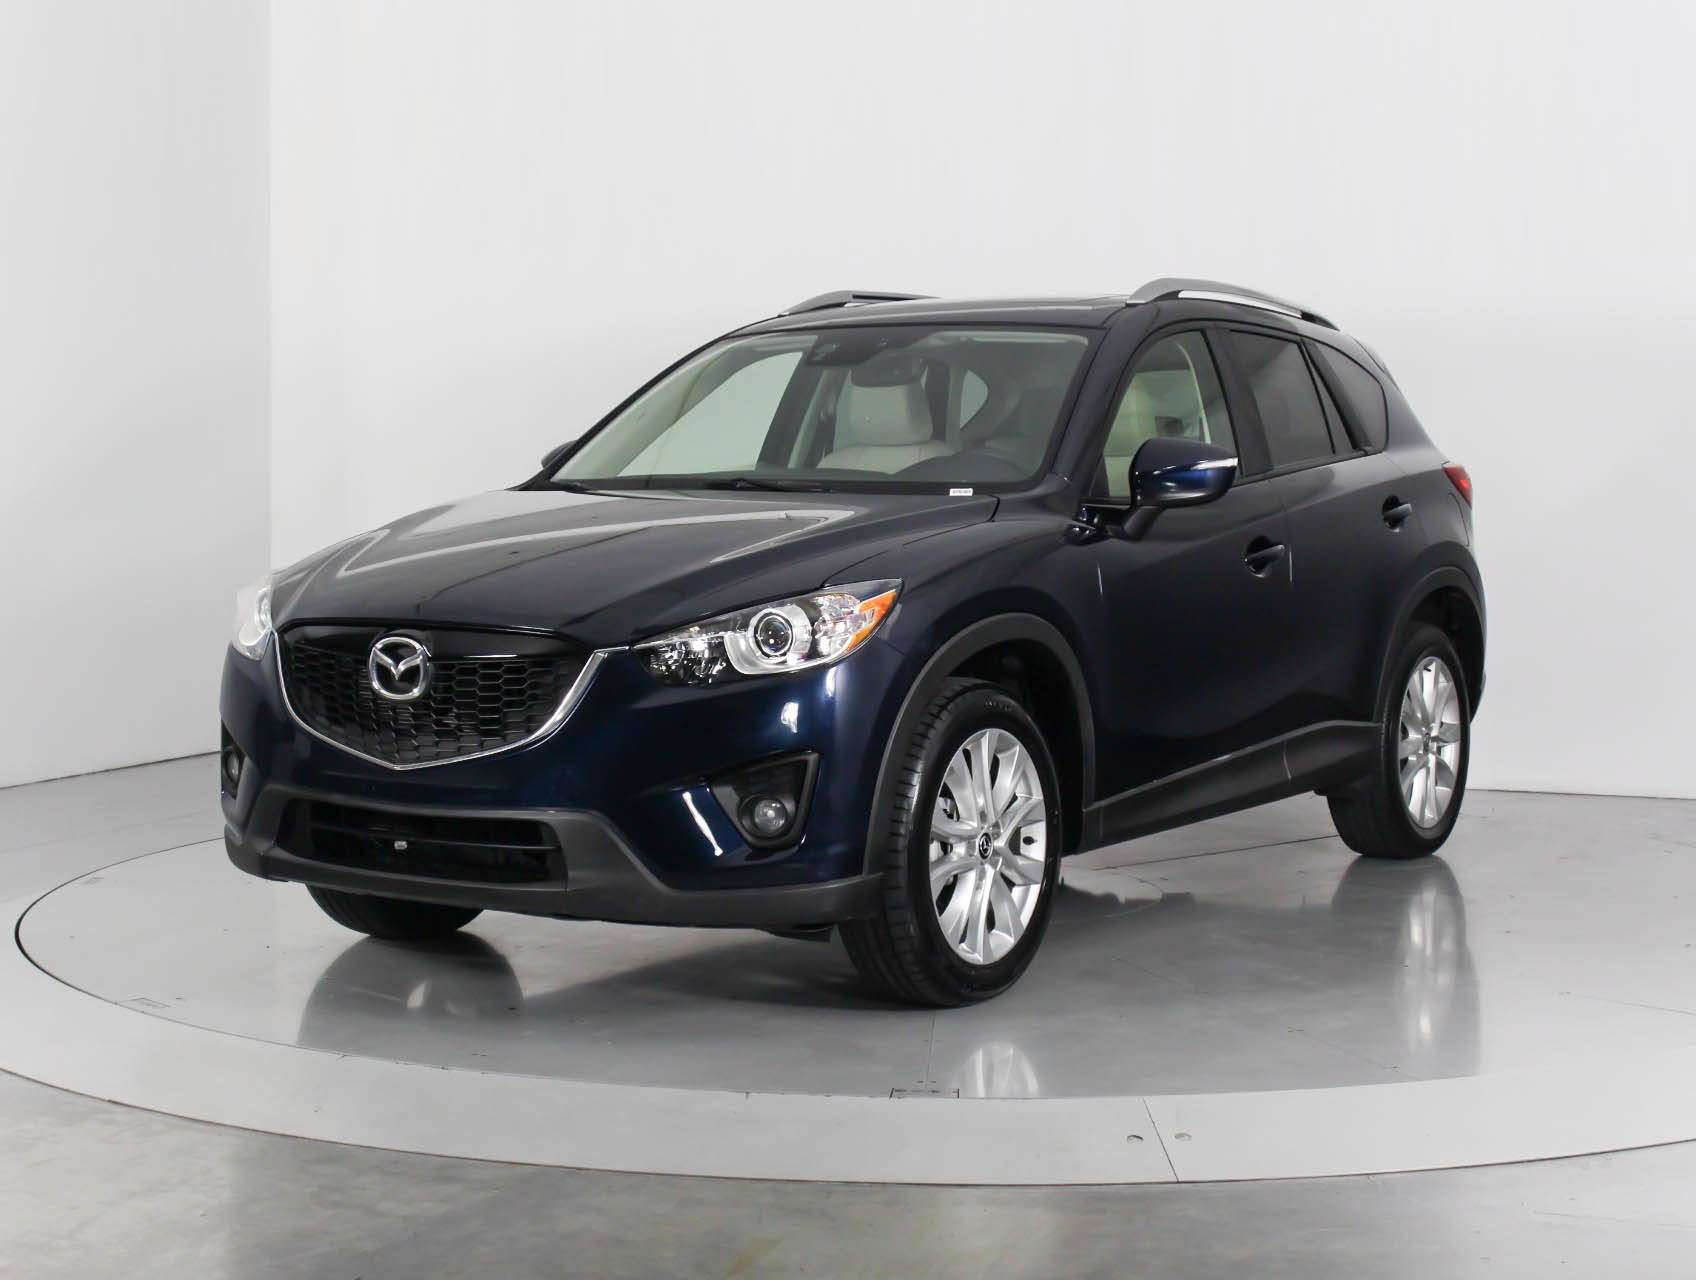 Used 2015 Mazda Cx 5 Grand Touring Suv For Sale In Hollywood Fl